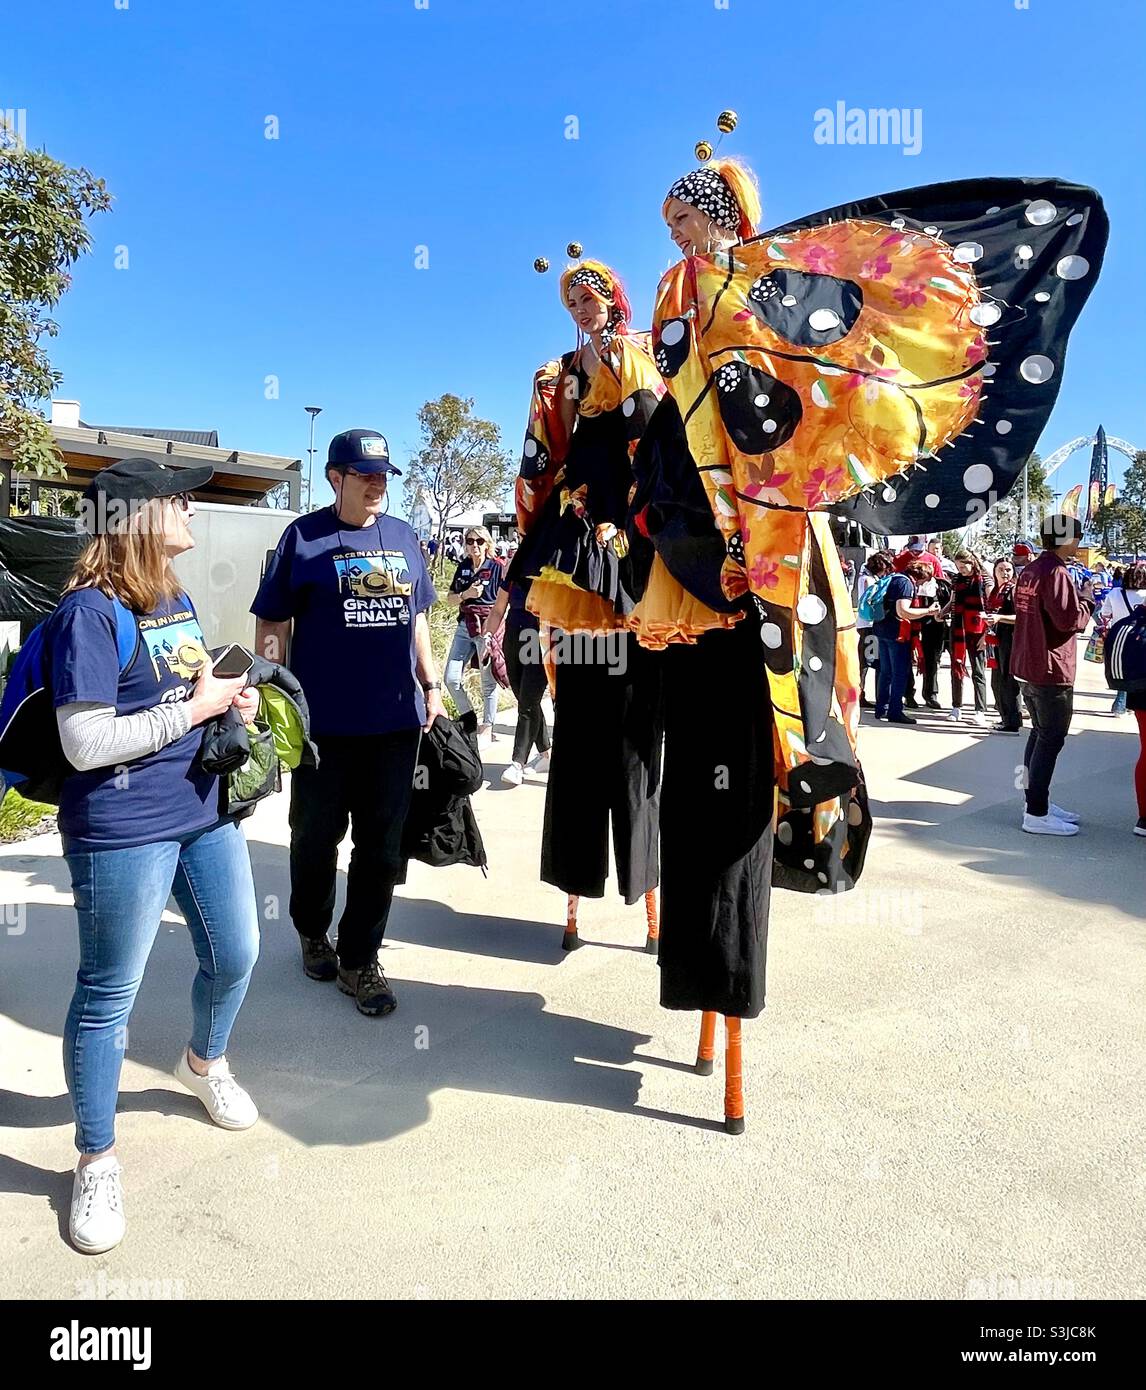 2021 AFL Grand Final at Optus Stadium, pregame crowd outside spectators near two women in butterfly costumes on stilts, Perth Western Australia. Stock Photo